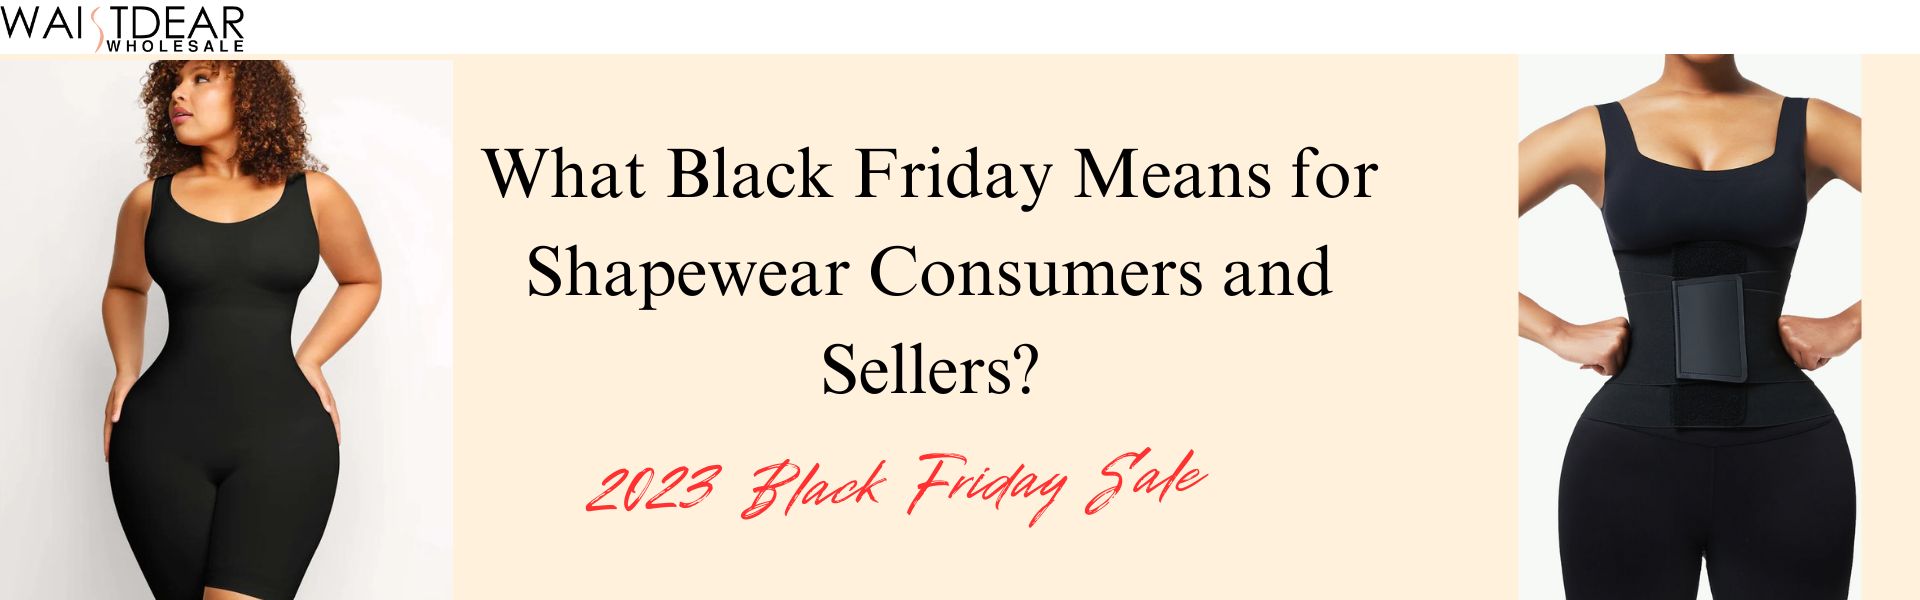 What Black Friday Means for Shapewear Consumers and Sellers?